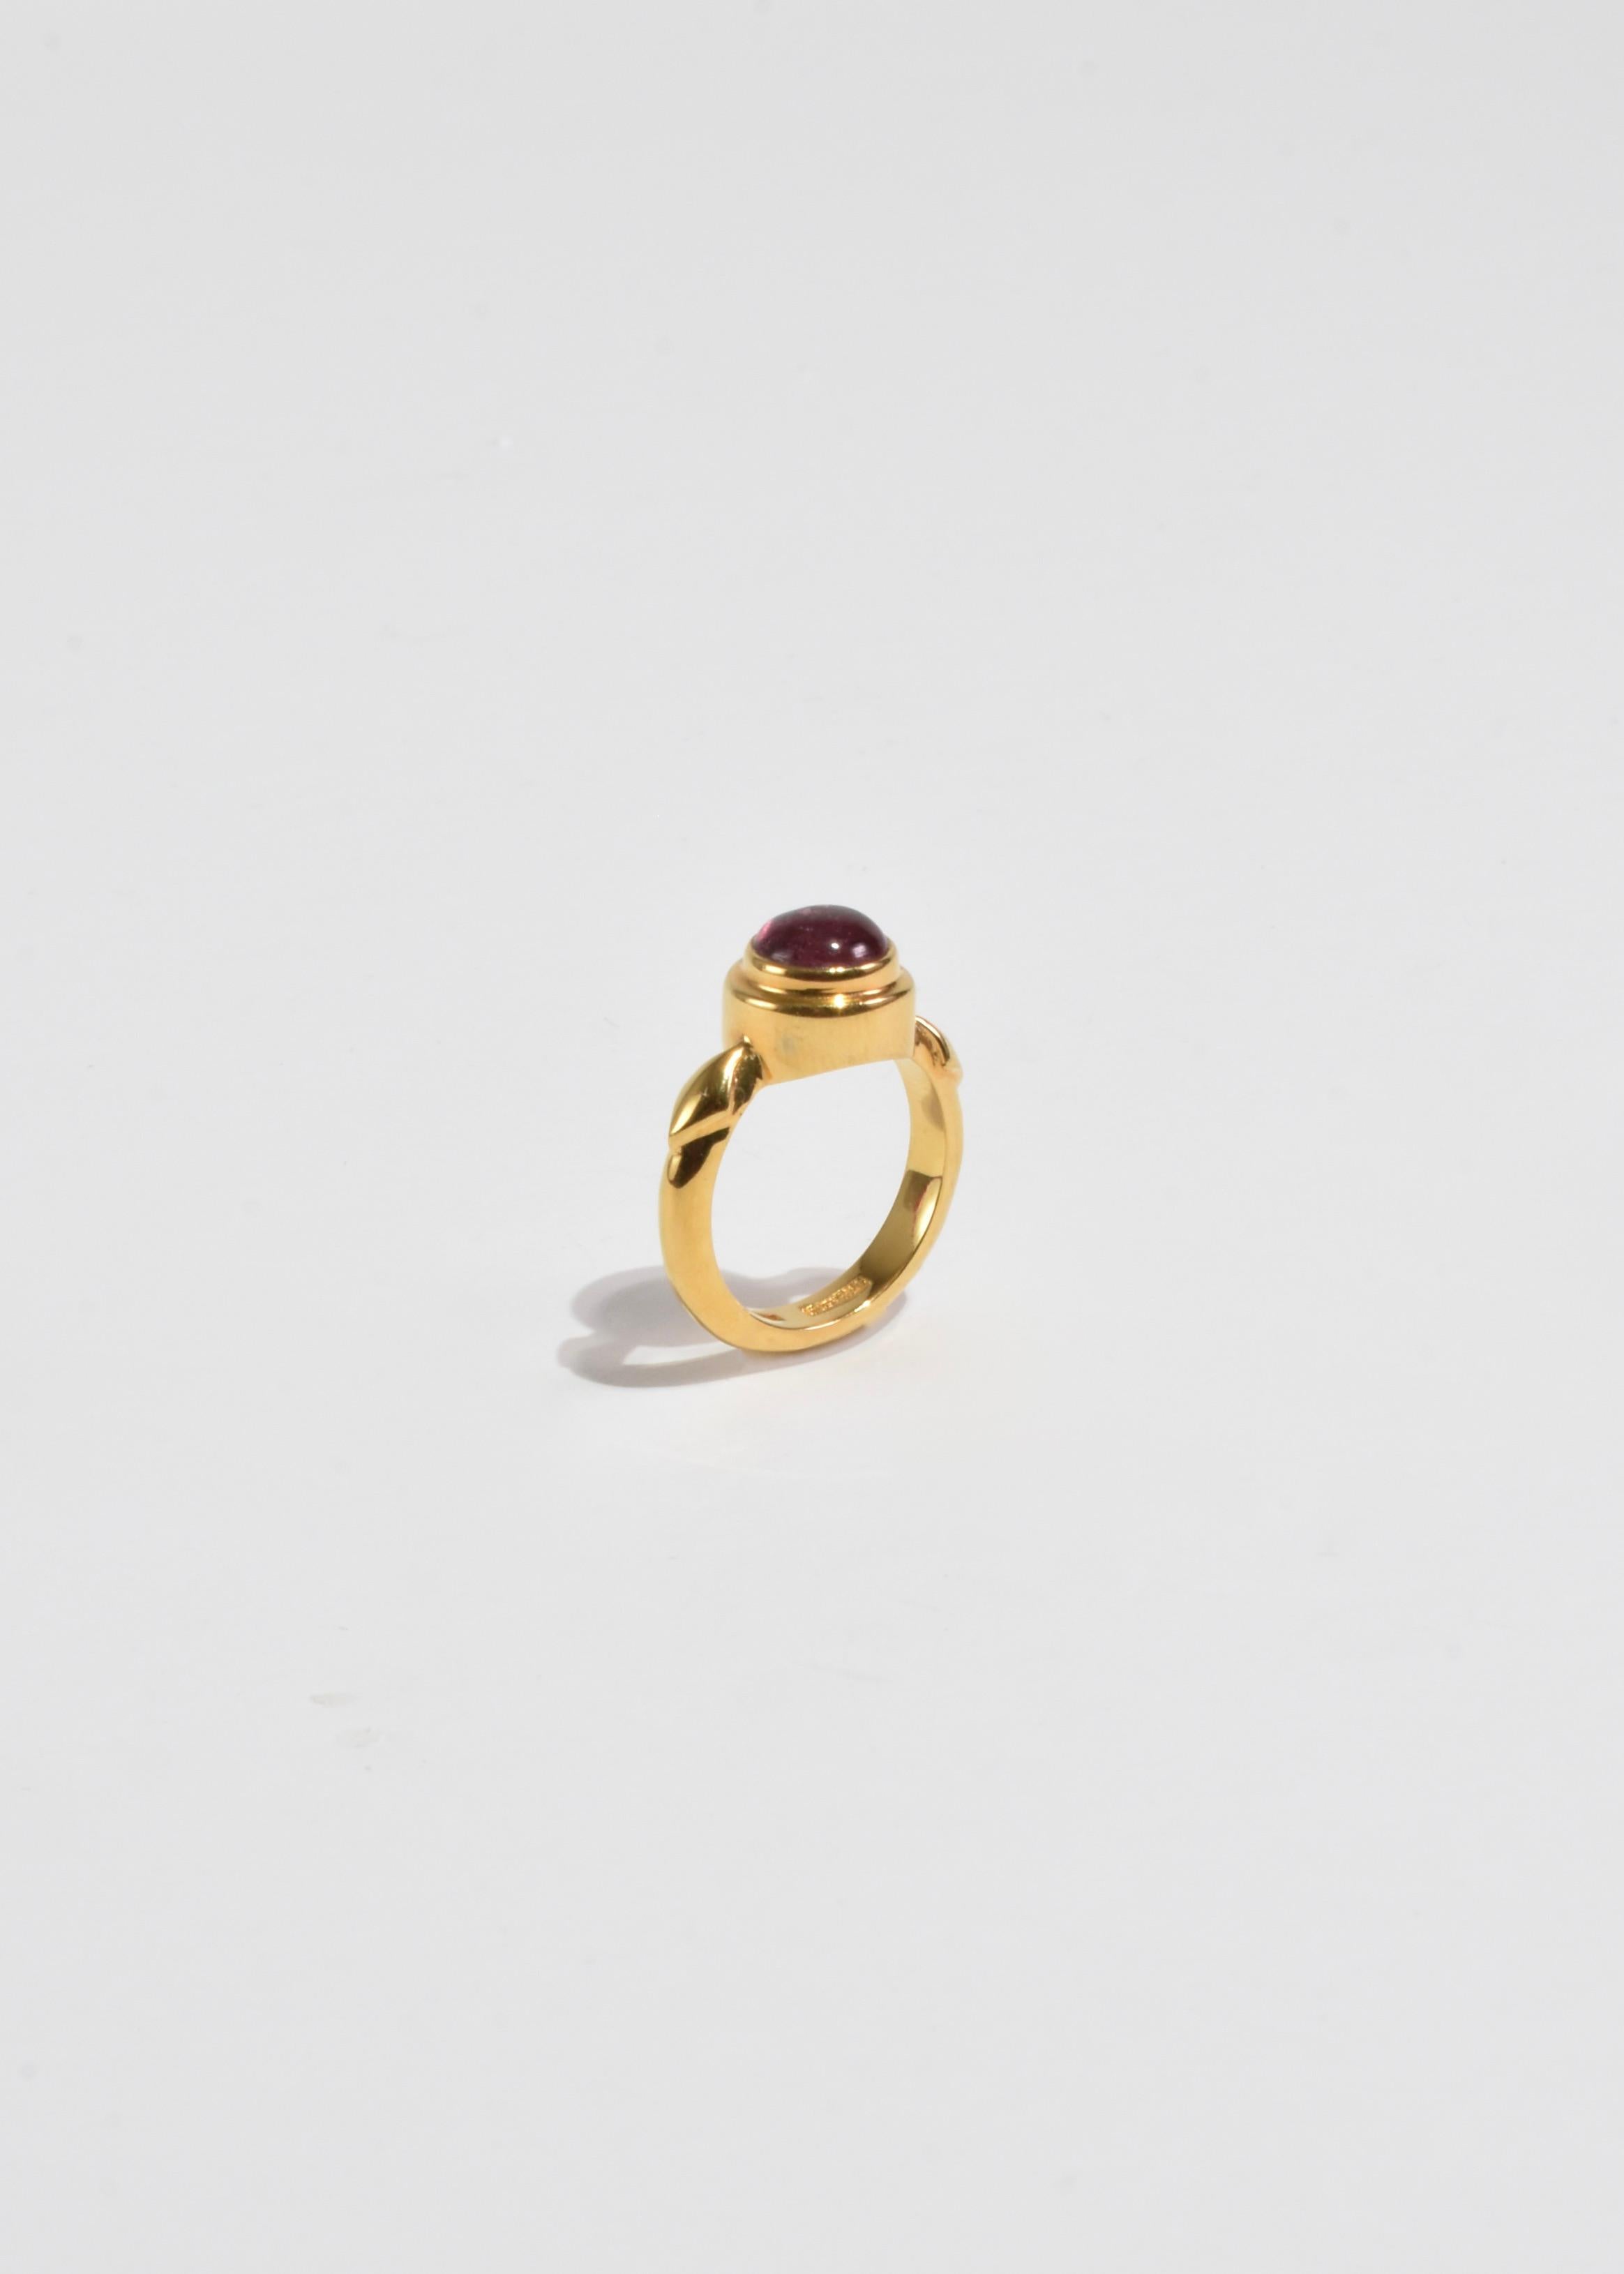 Gold Tourmaline Ring In Excellent Condition For Sale In Richmond, VA